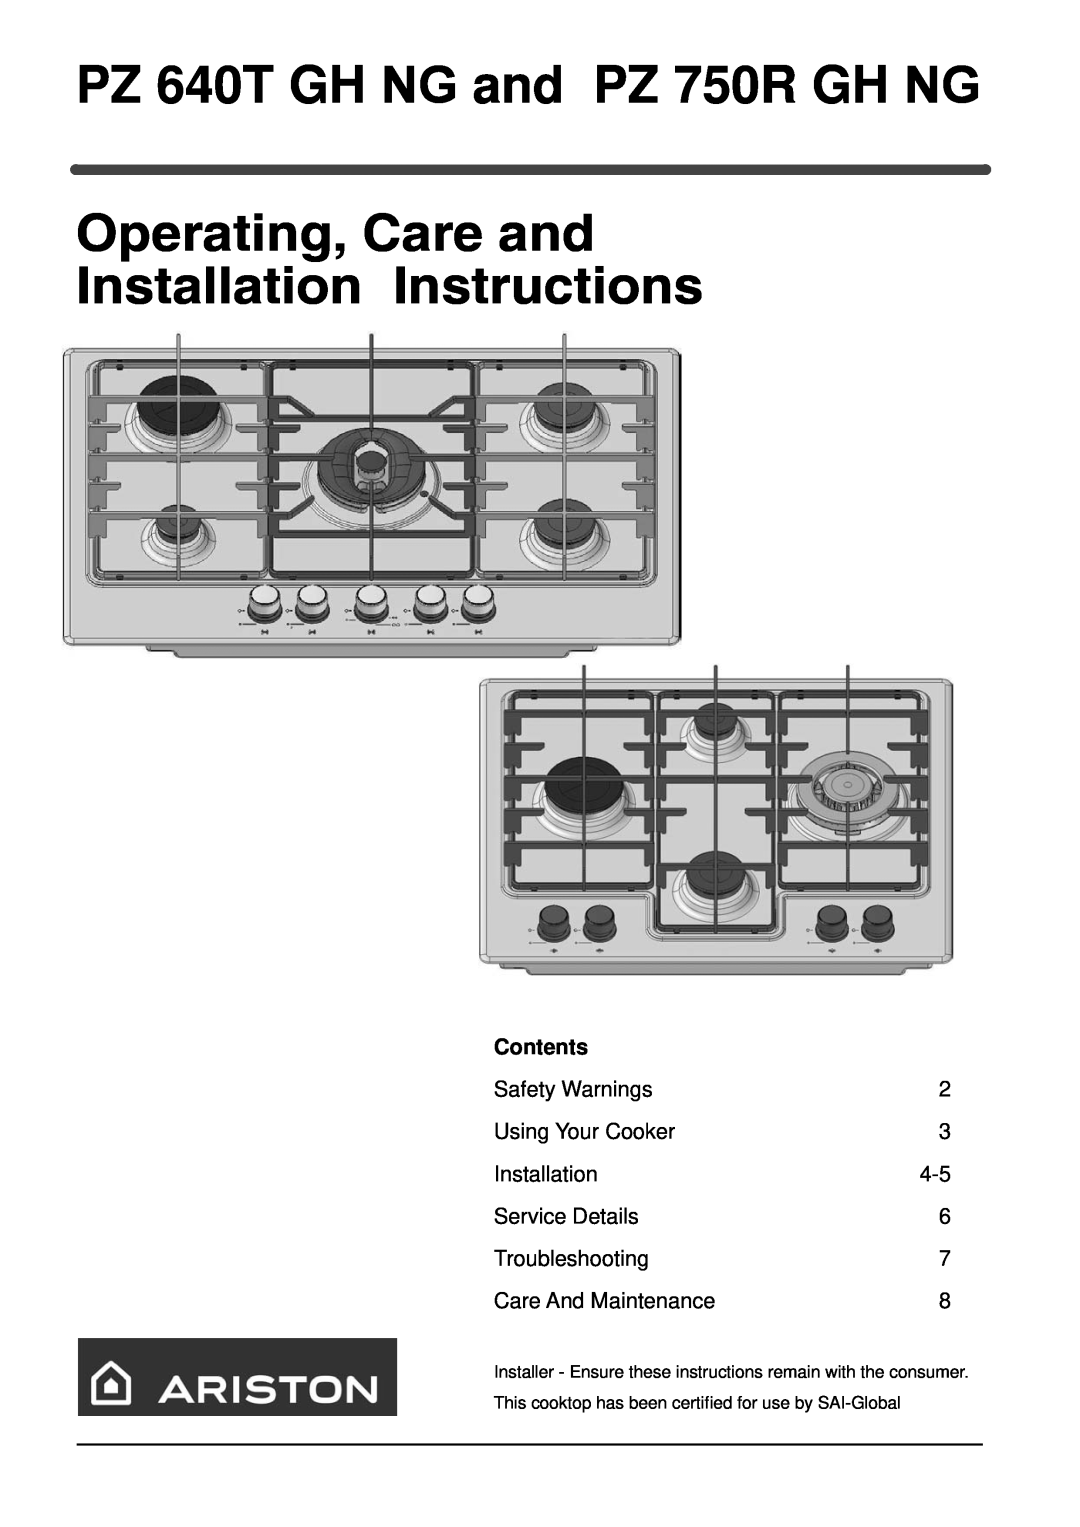 Indesit installation instructions PZ 640T GH NG and PZ 750R GH NG, Contents, Safety Warnings, Using Your Cooker 